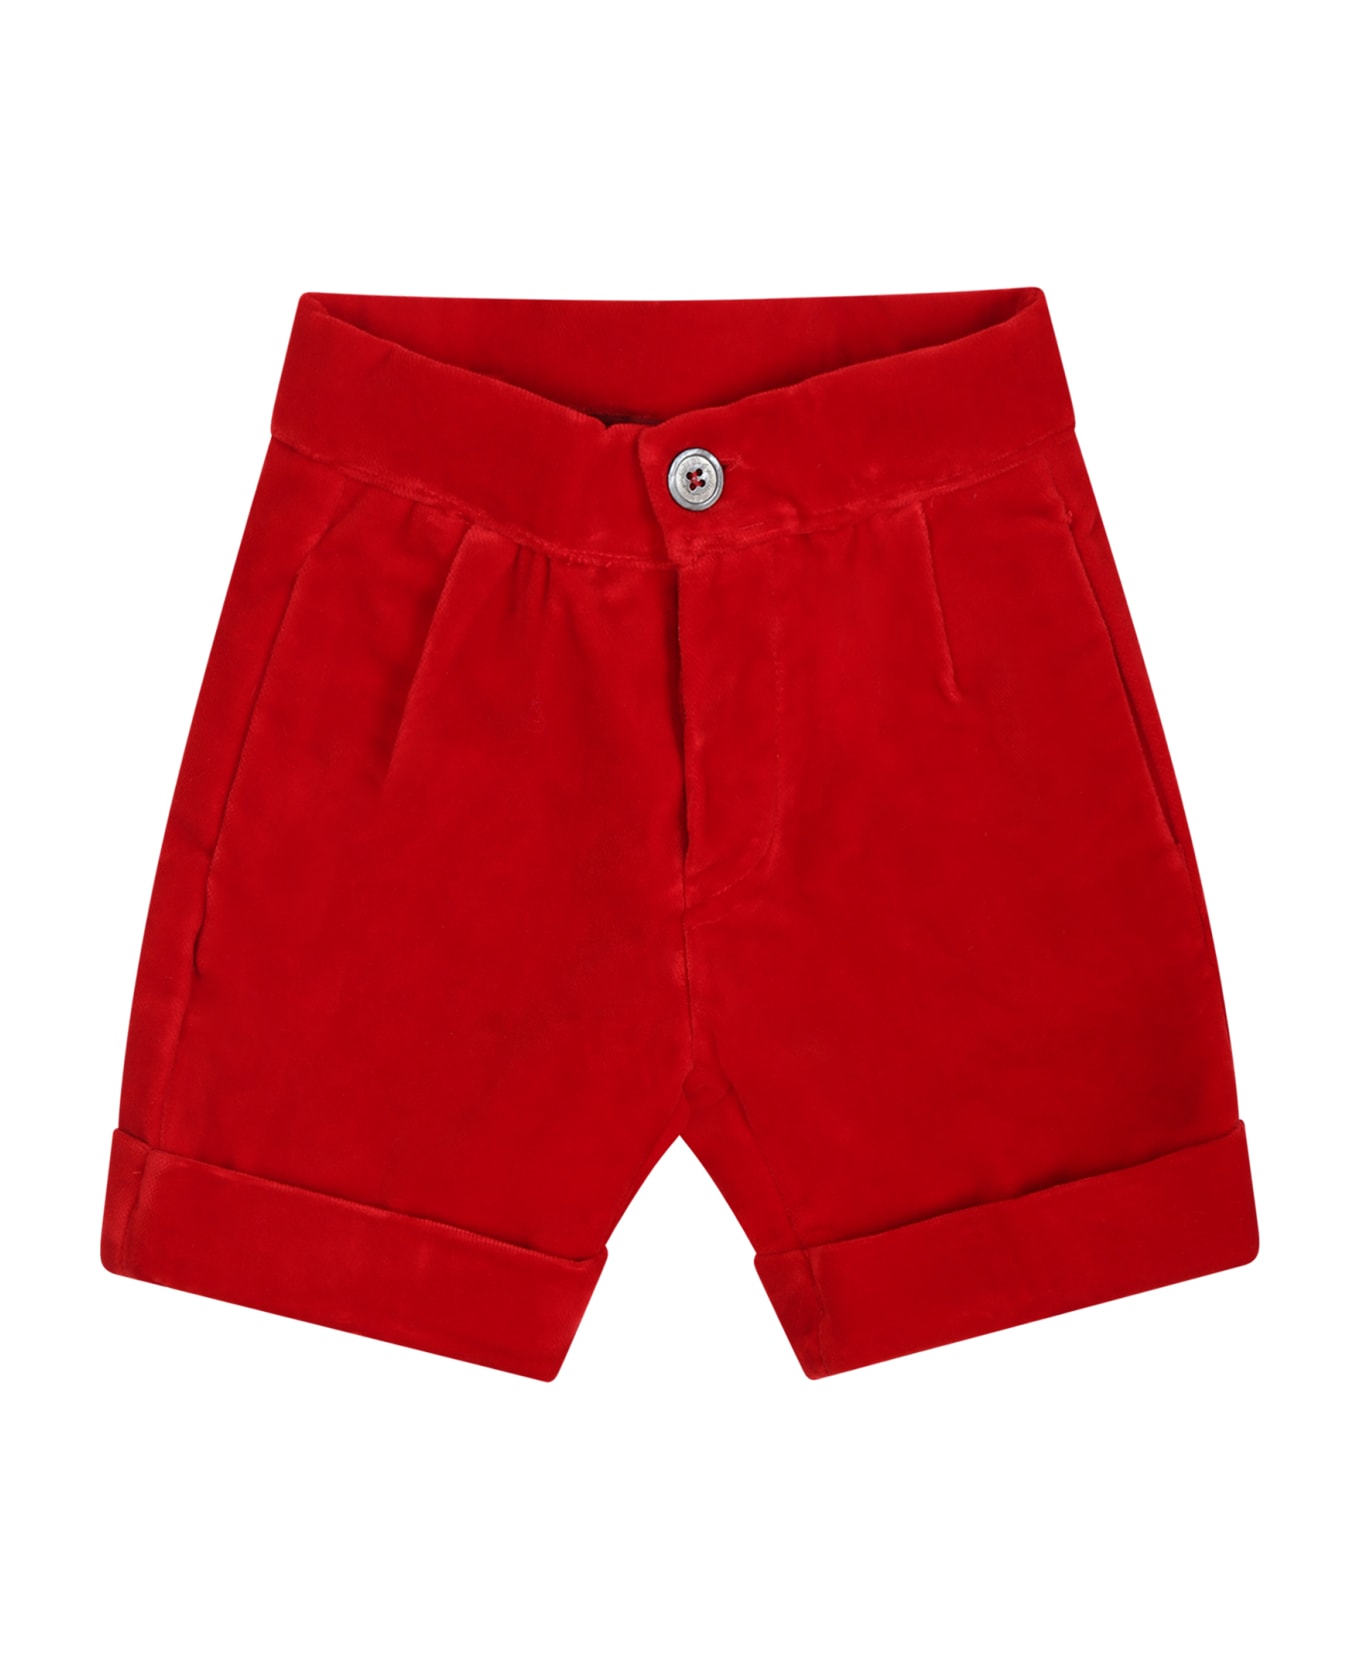 La stupenderia Red Shorts For Baby Boy - Red ボトムス